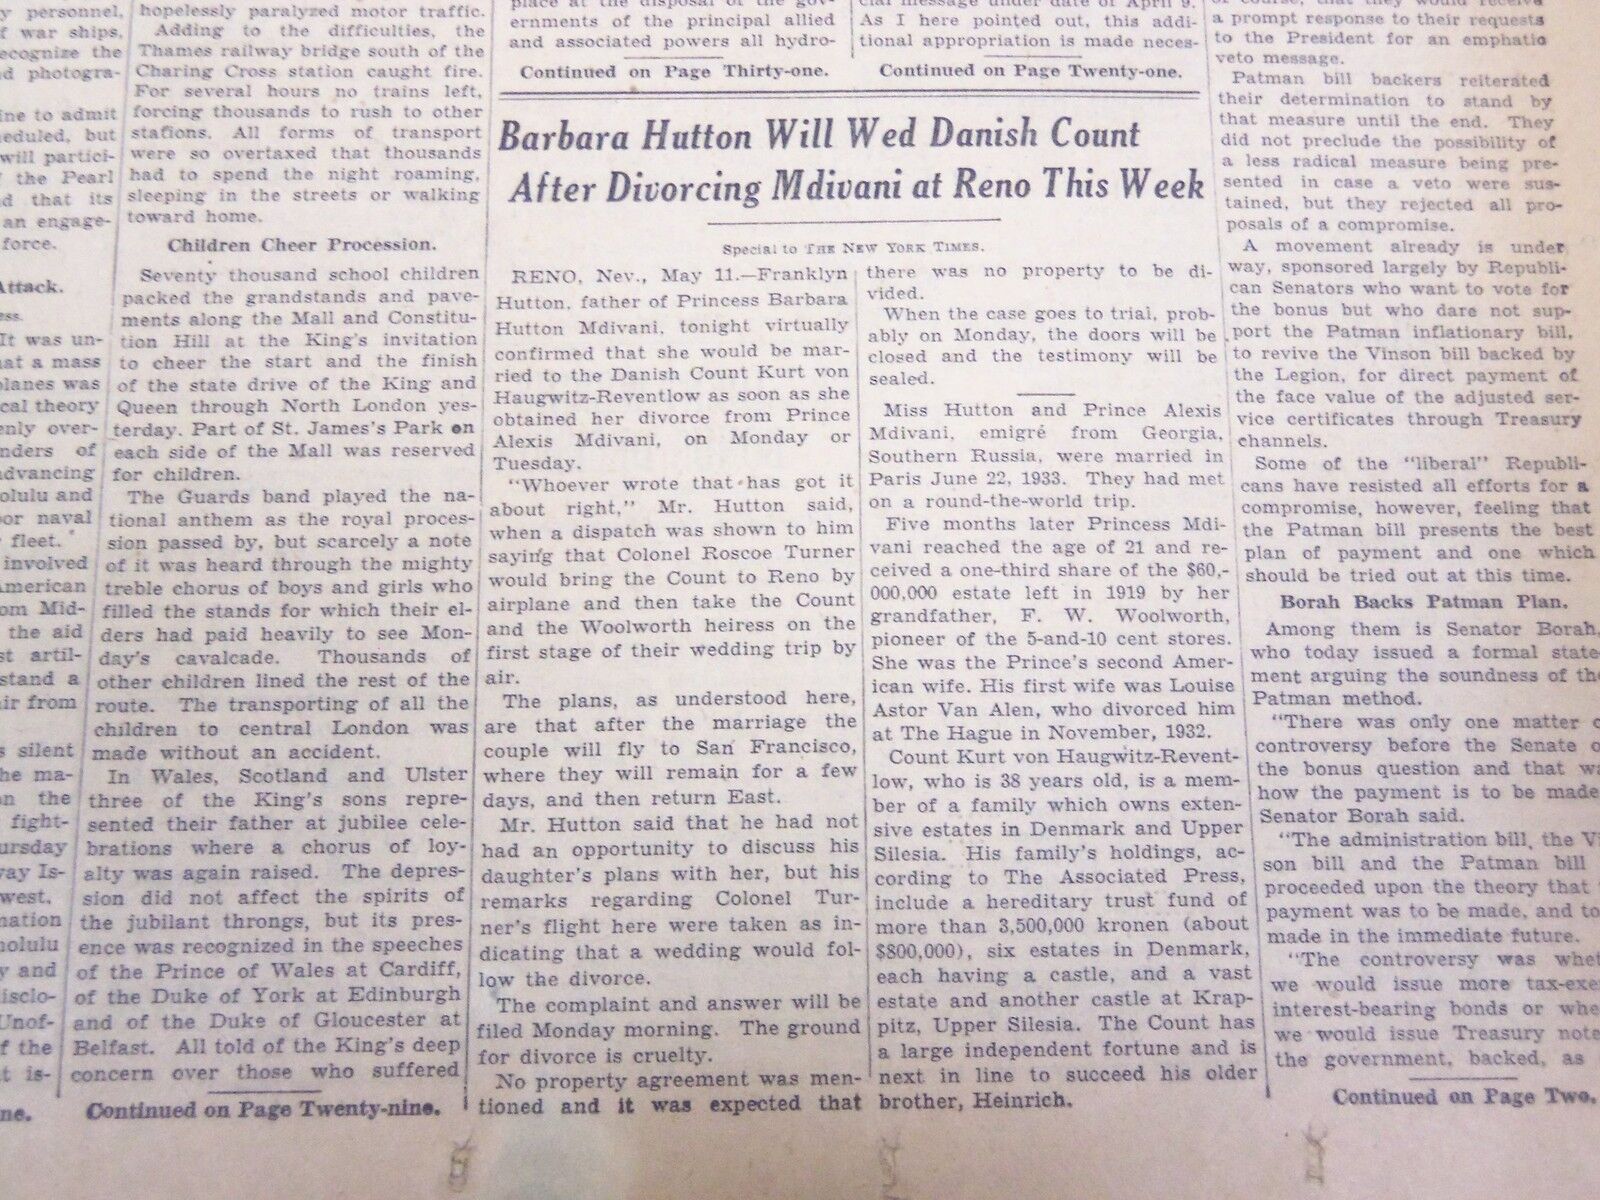 1935 MAY 12 NEW YORK TIMES - BARBARA HUTTON WILL WED DANISH COUNT - NT 4840